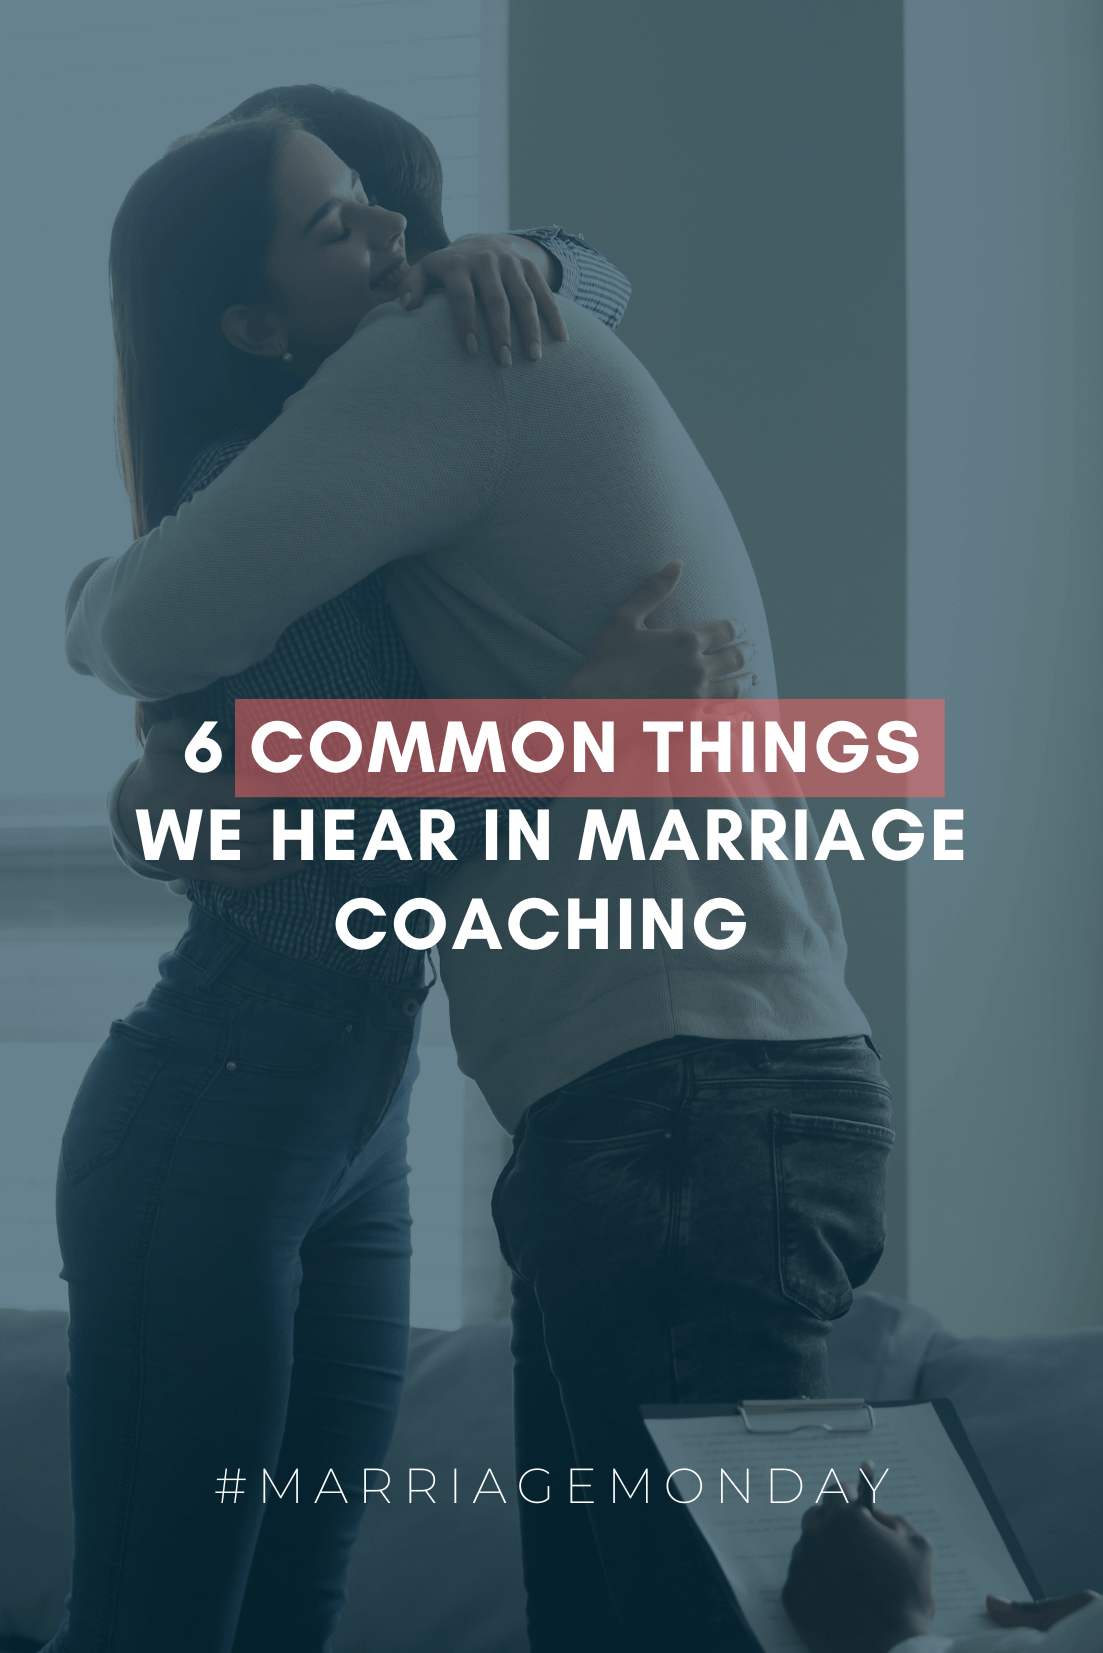 6 Common Things We Hear in Marriage Coaching | #MarriageMonday